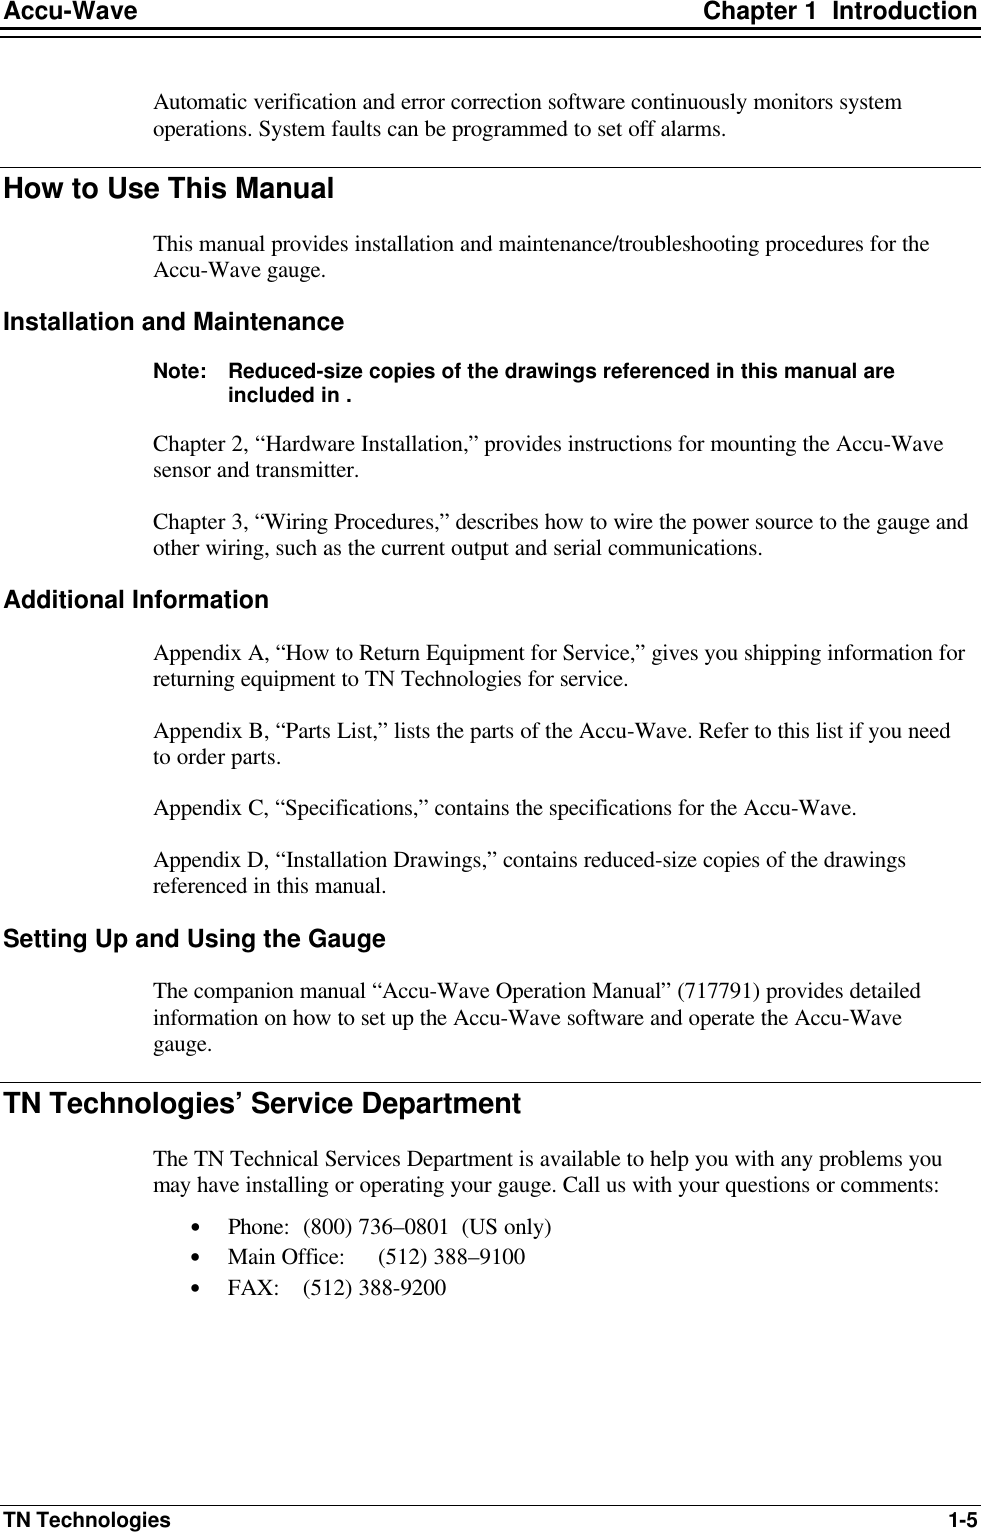 Accu-Wave Chapter 1  Introduction TN Technologies 1-5 Automatic verification and error correction software continuously monitors system operations. System faults can be programmed to set off alarms. How to Use This Manual This manual provides installation and maintenance/troubleshooting procedures for the Accu-Wave gauge. Installation and Maintenance Note: Reduced-size copies of the drawings referenced in this manual are included in . Chapter 2, “Hardware Installation,” provides instructions for mounting the Accu-Wave sensor and transmitter. Chapter 3, “Wiring Procedures,” describes how to wire the power source to the gauge and other wiring, such as the current output and serial communications. Additional Information Appendix A, “How to Return Equipment for Service,” gives you shipping information for returning equipment to TN Technologies for service. Appendix B, “Parts List,” lists the parts of the Accu-Wave. Refer to this list if you need to order parts. Appendix C, “Specifications,” contains the specifications for the Accu-Wave. Appendix D, “Installation Drawings,” contains reduced-size copies of the drawings referenced in this manual. Setting Up and Using the Gauge The companion manual “Accu-Wave Operation Manual” (717791) provides detailed information on how to set up the Accu-Wave software and operate the Accu-Wave gauge. TN Technologies’ Service Department The TN Technical Services Department is available to help you with any problems you may have installing or operating your gauge. Call us with your questions or comments: • Phone: (800) 736–0801  (US only) • Main Office: (512) 388–9100 • FAX: (512) 388-9200 